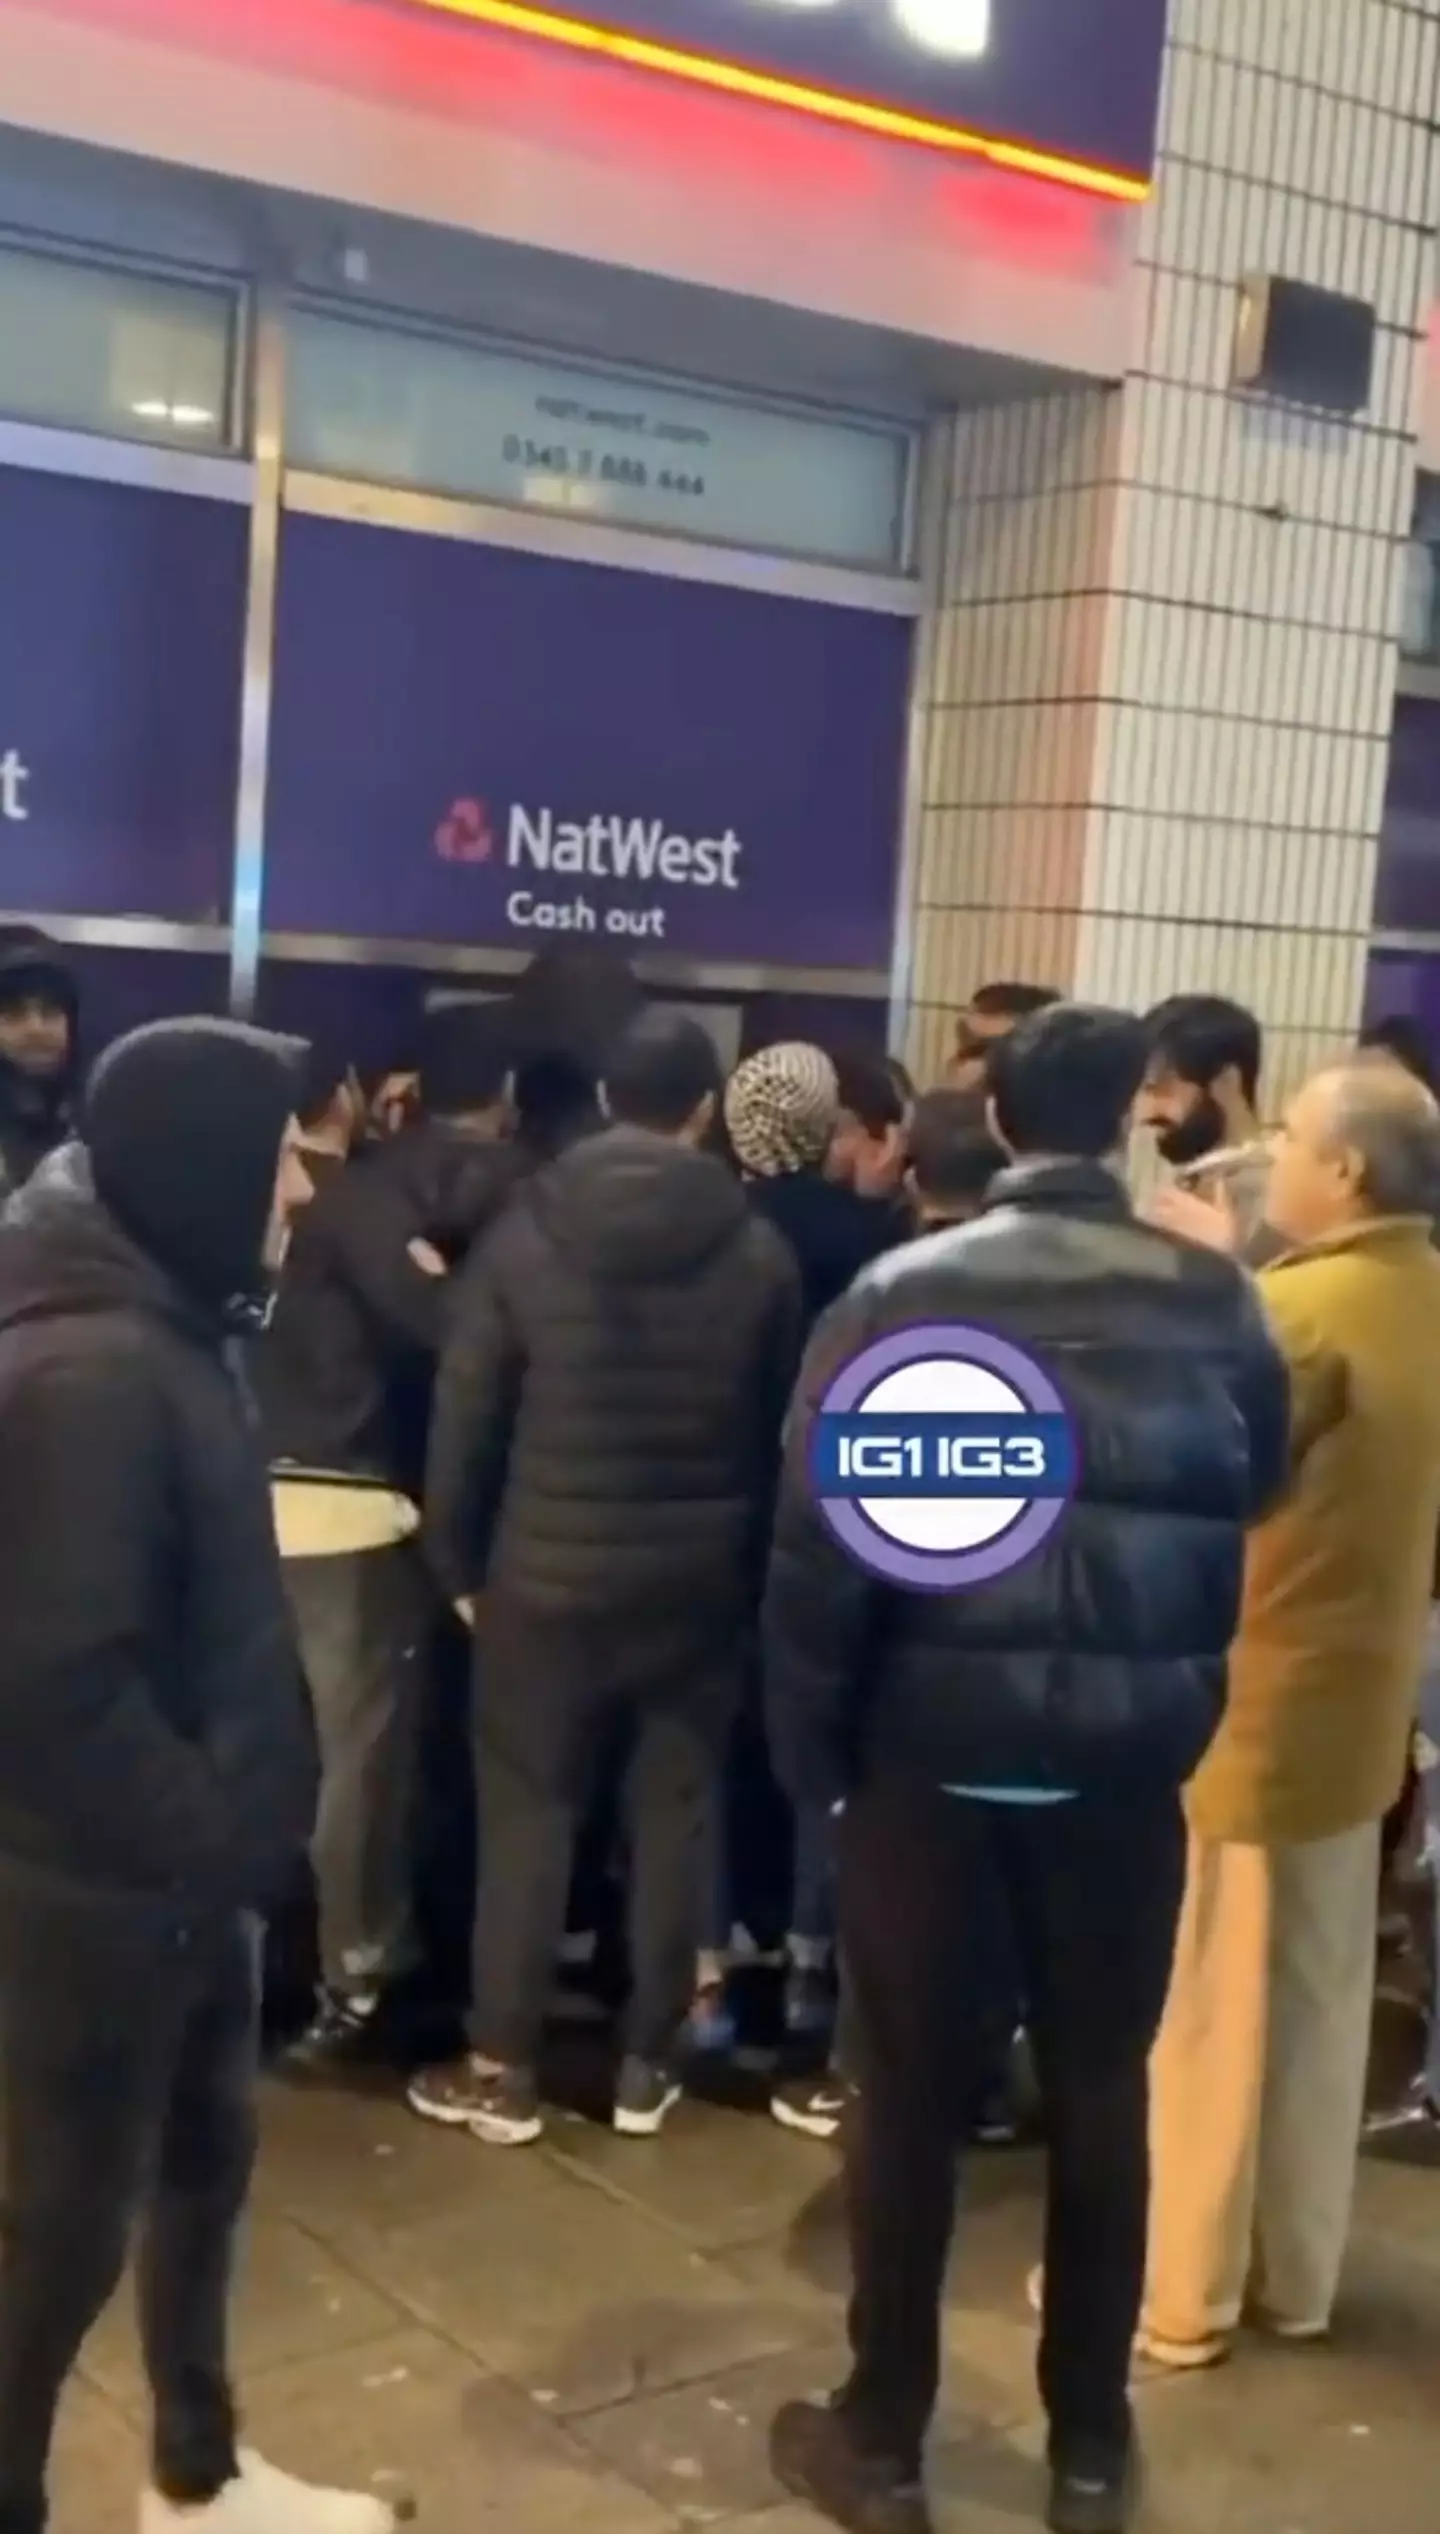 NatWest have now fixed the rogue cash machine.